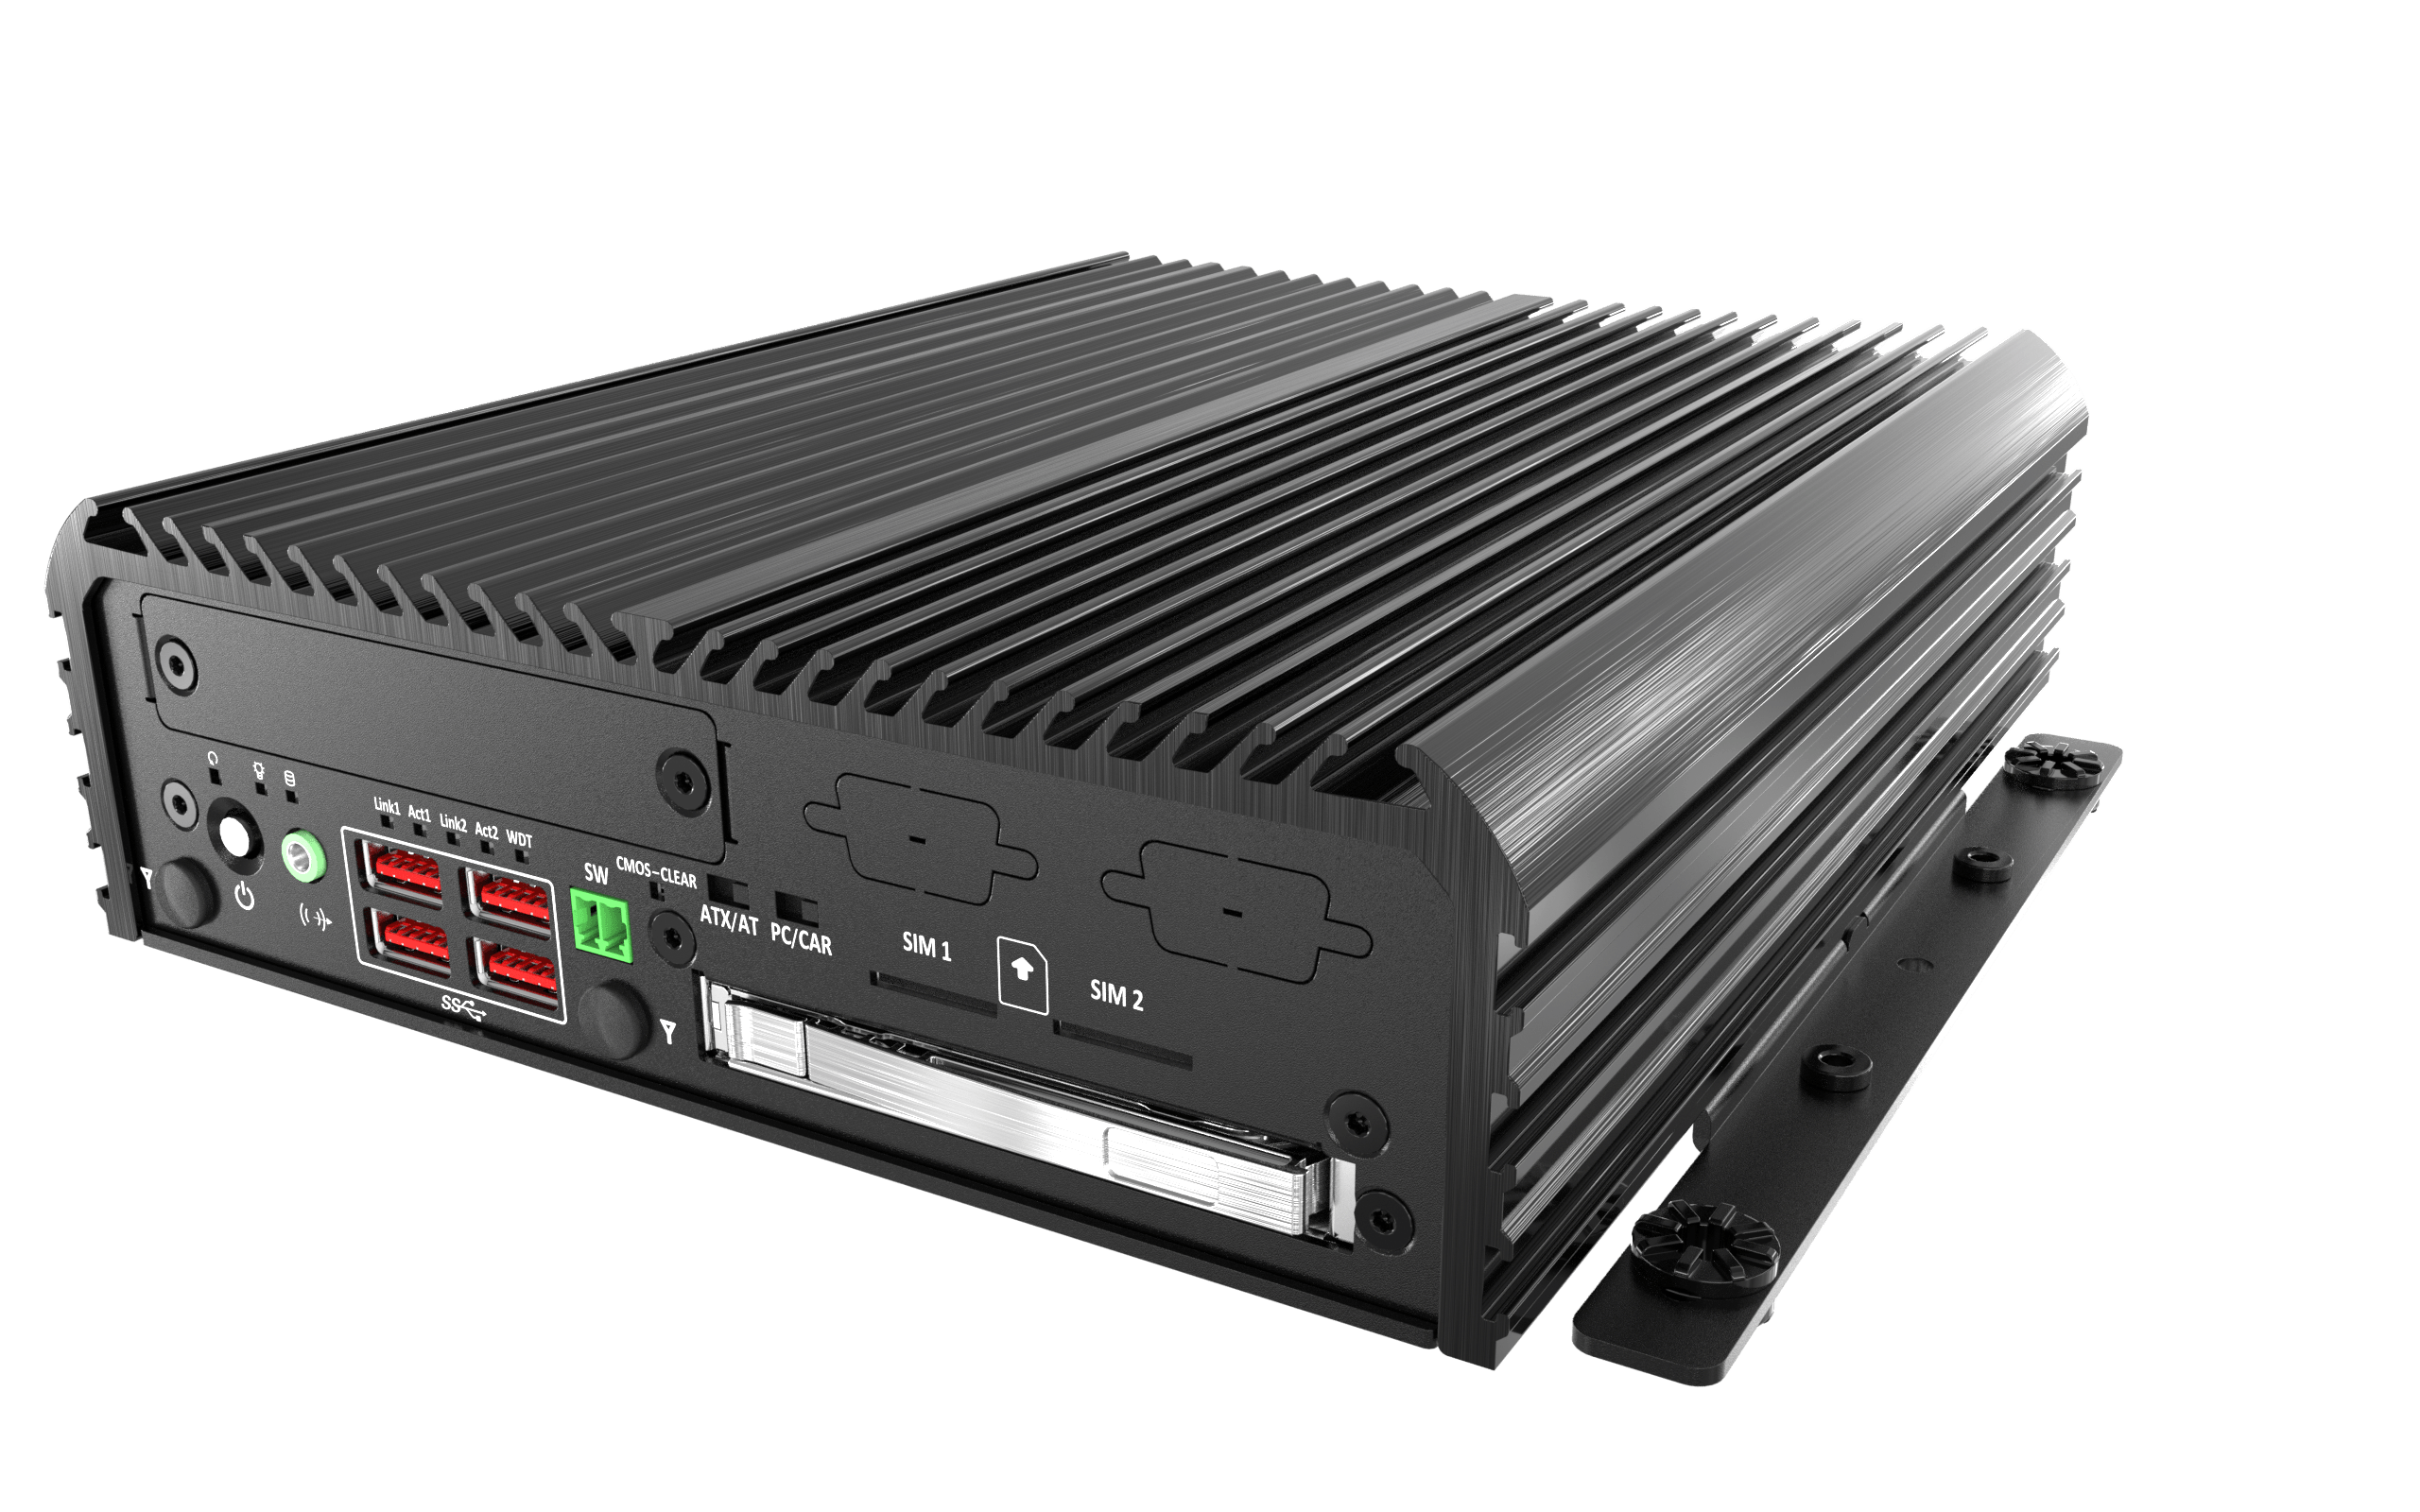 RCO-3000-CML Small Form Factor Computer with LGA 1200 for 10th Gen Intel CPU & Q470E PCH